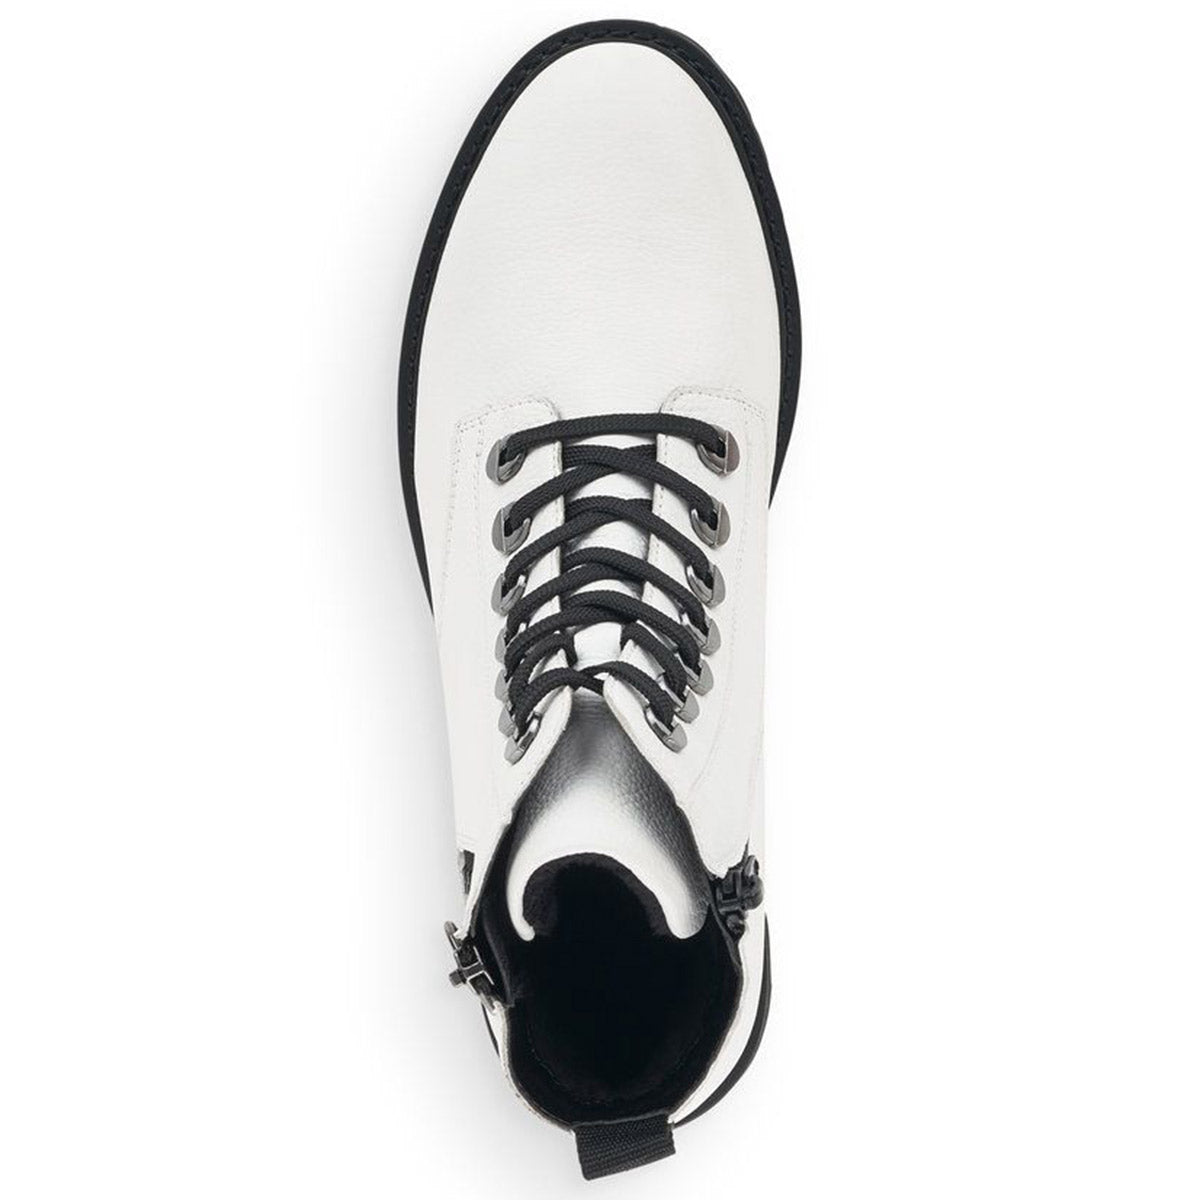 Black and white Remonte D8671 women&#39;s boots viewed from above with a lace-up closure. 

Product Name: REMONTE D8671 BOOT WHITE - WOMENS
Brand Name: Remonte